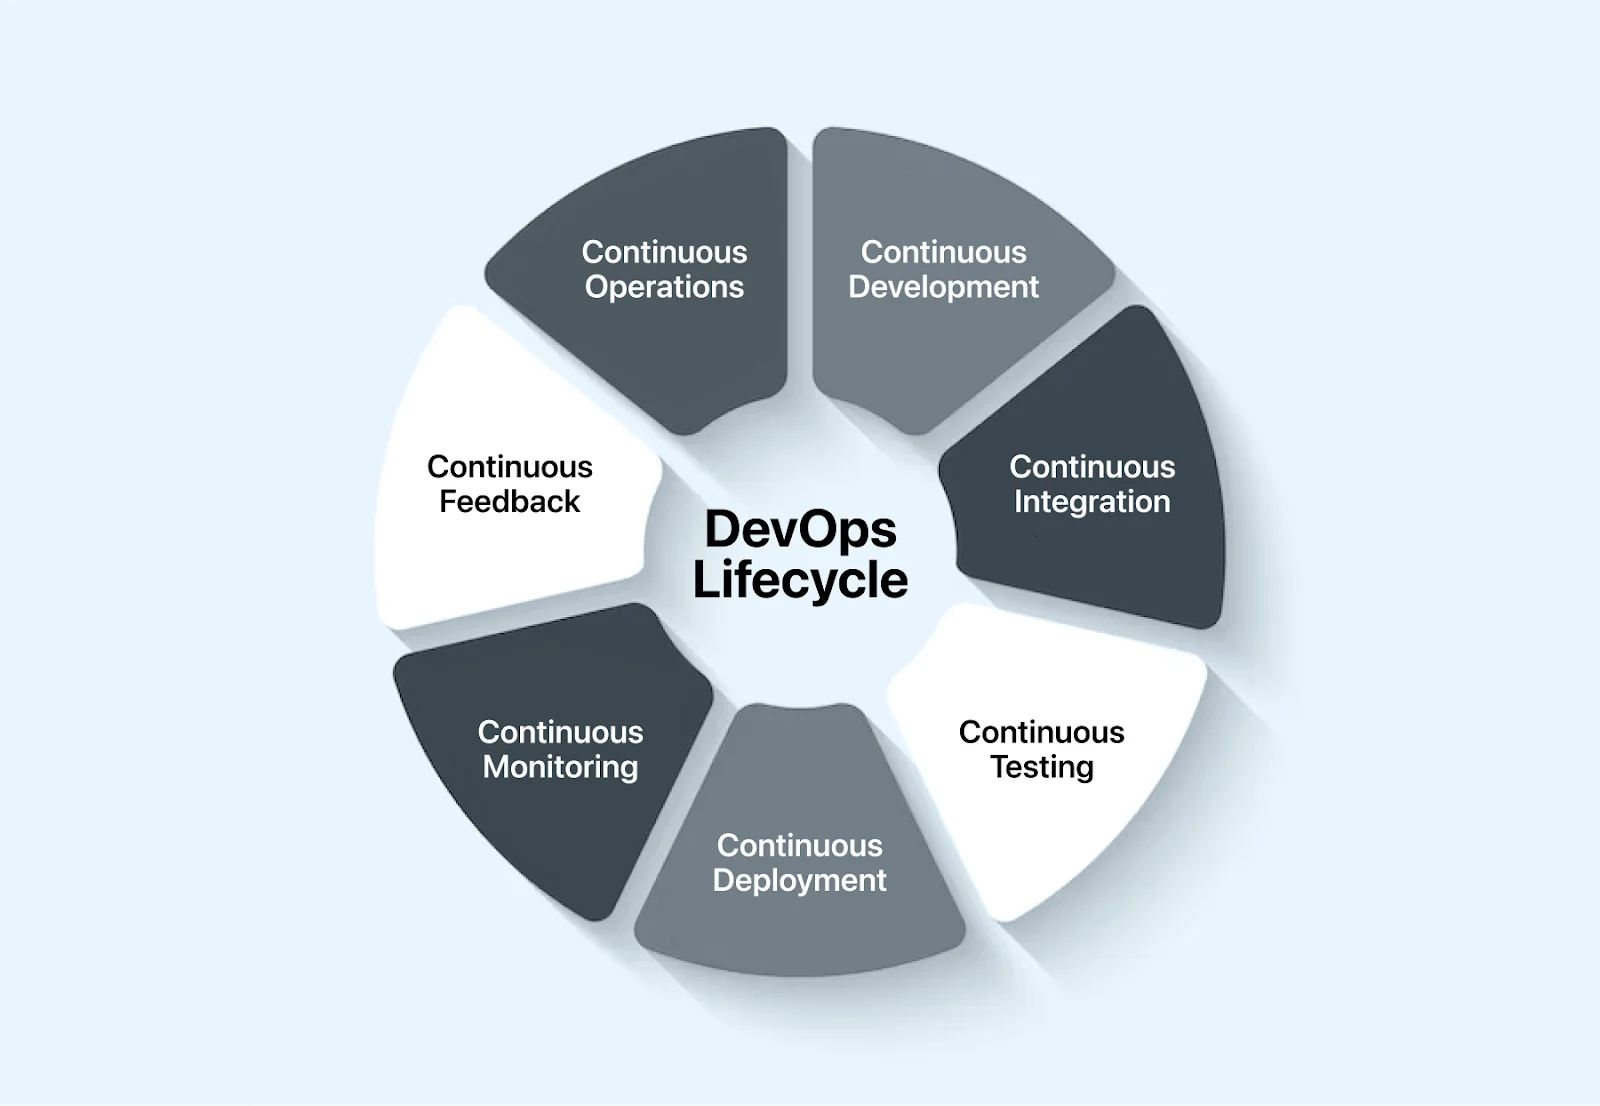 Components of the DevOps LifeCycle